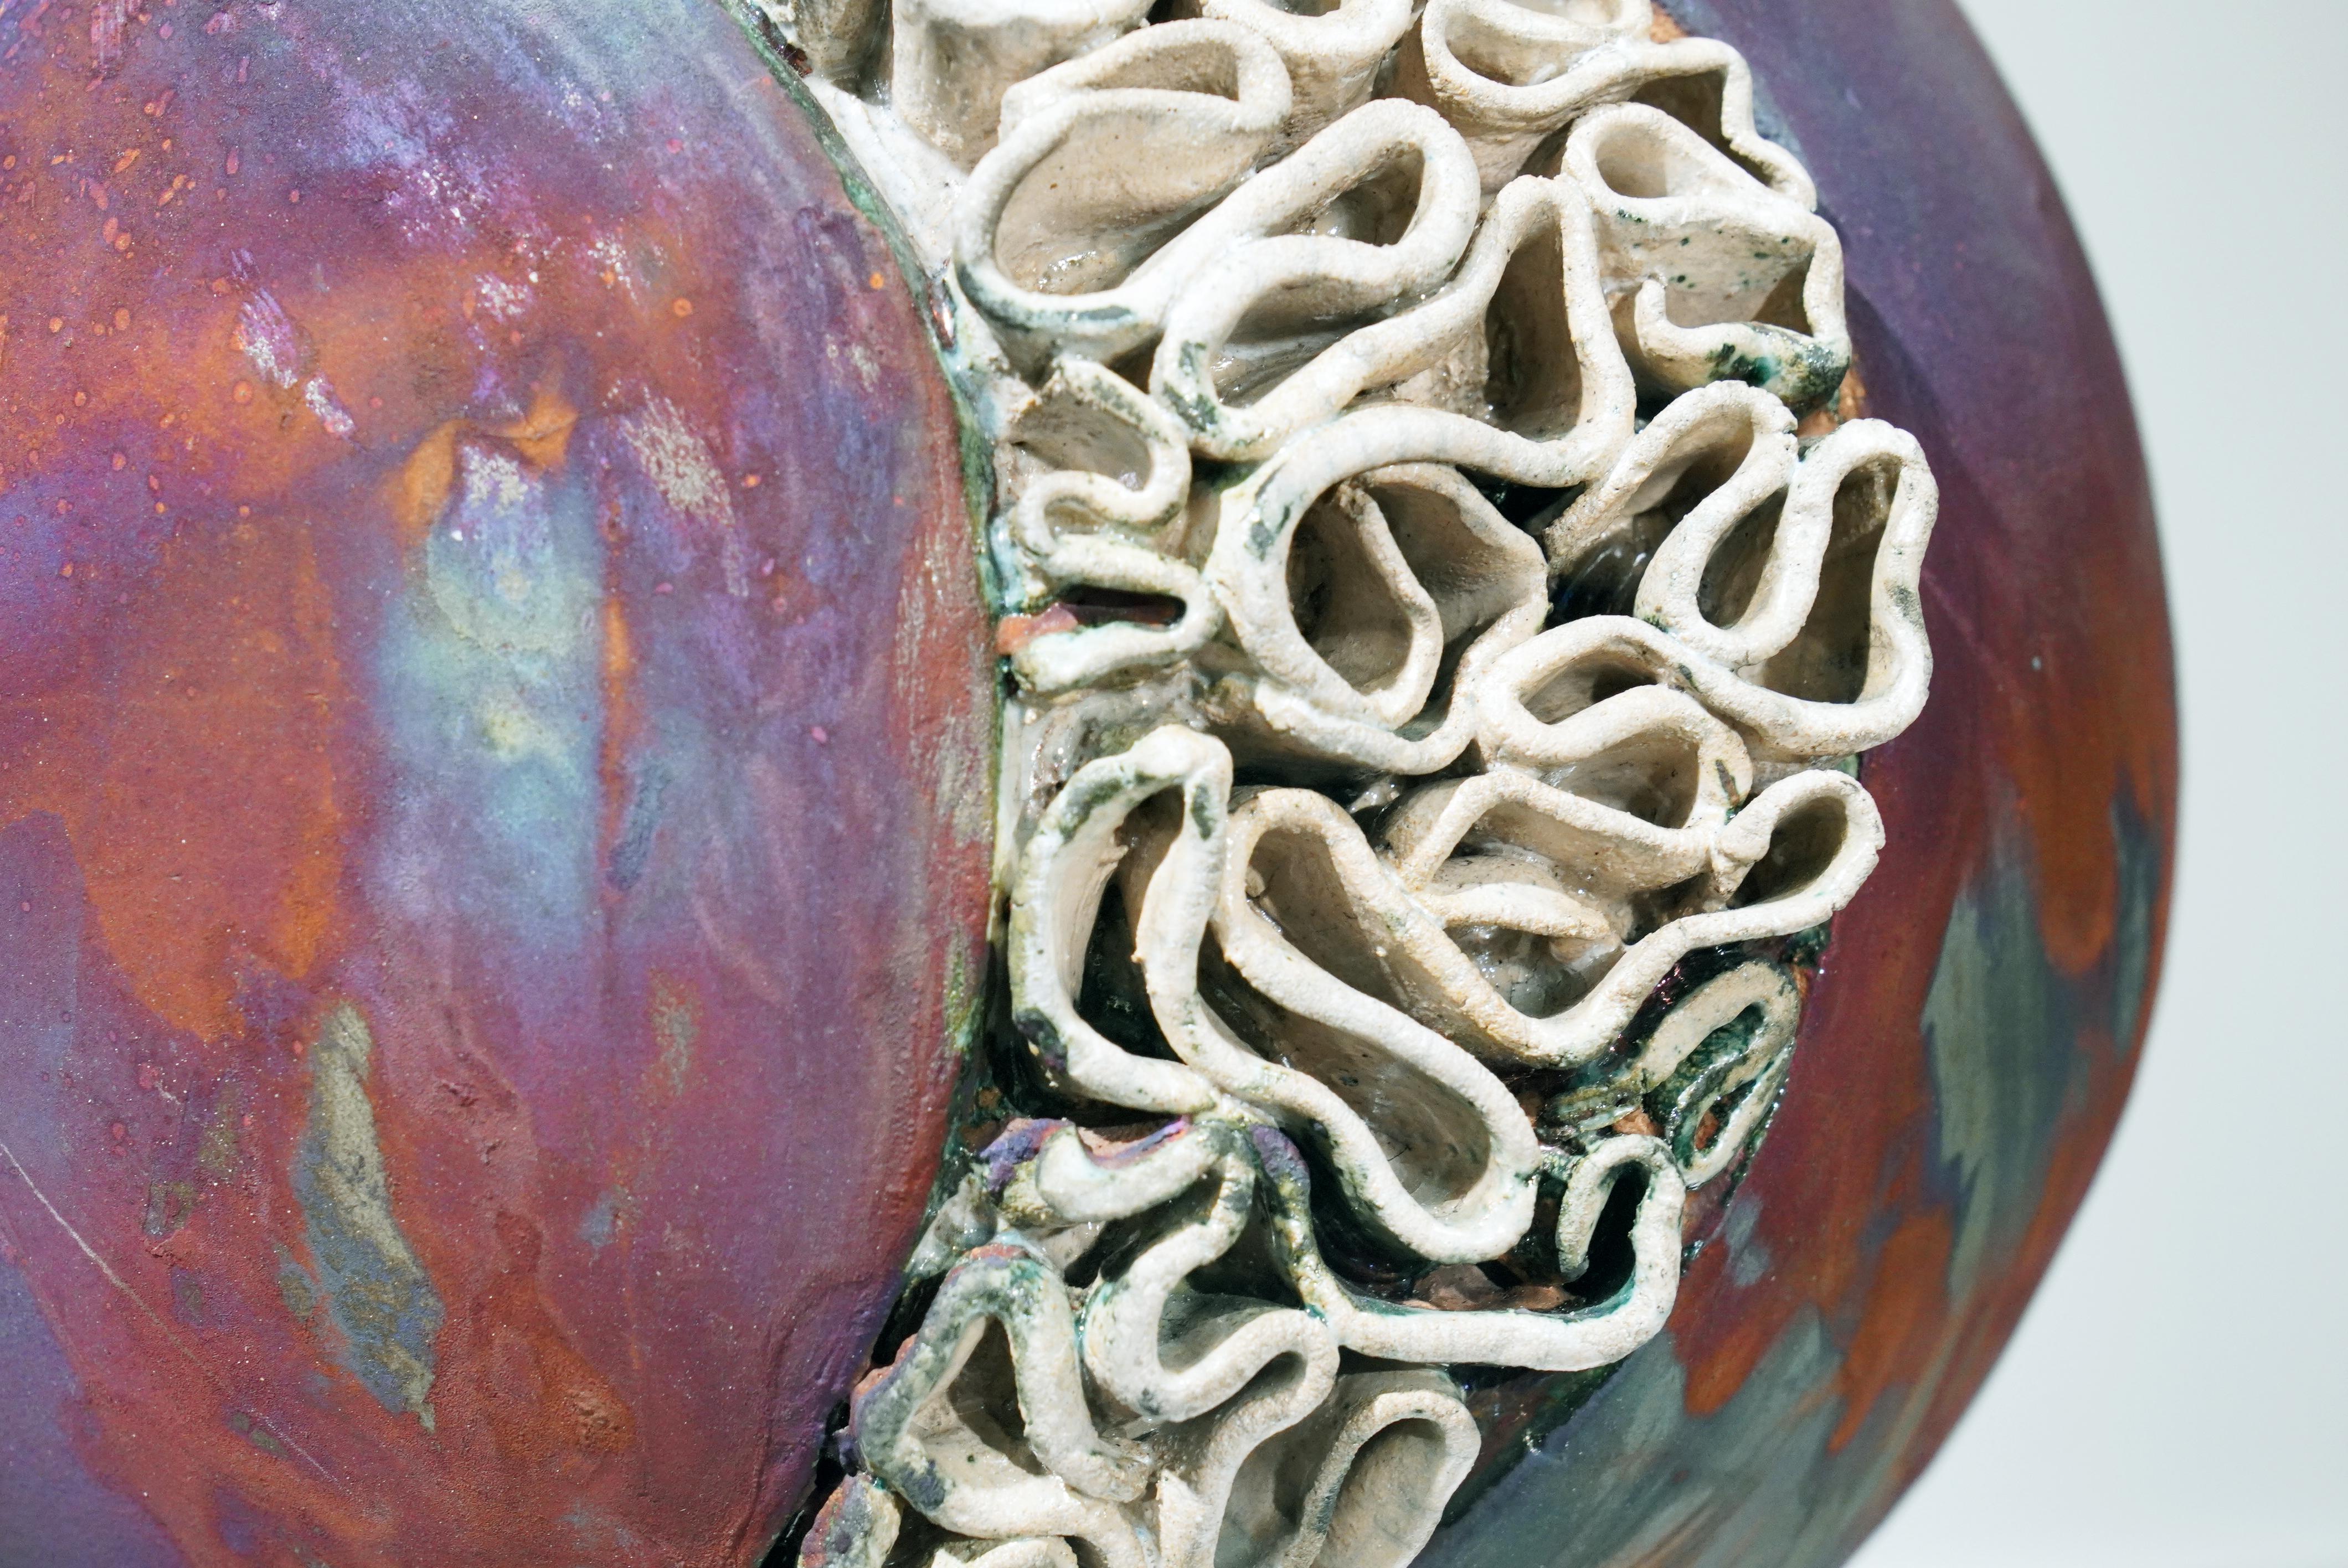 Fired Mother - life magnified collection raku ceramic pottery sculpture by Adil Ghani